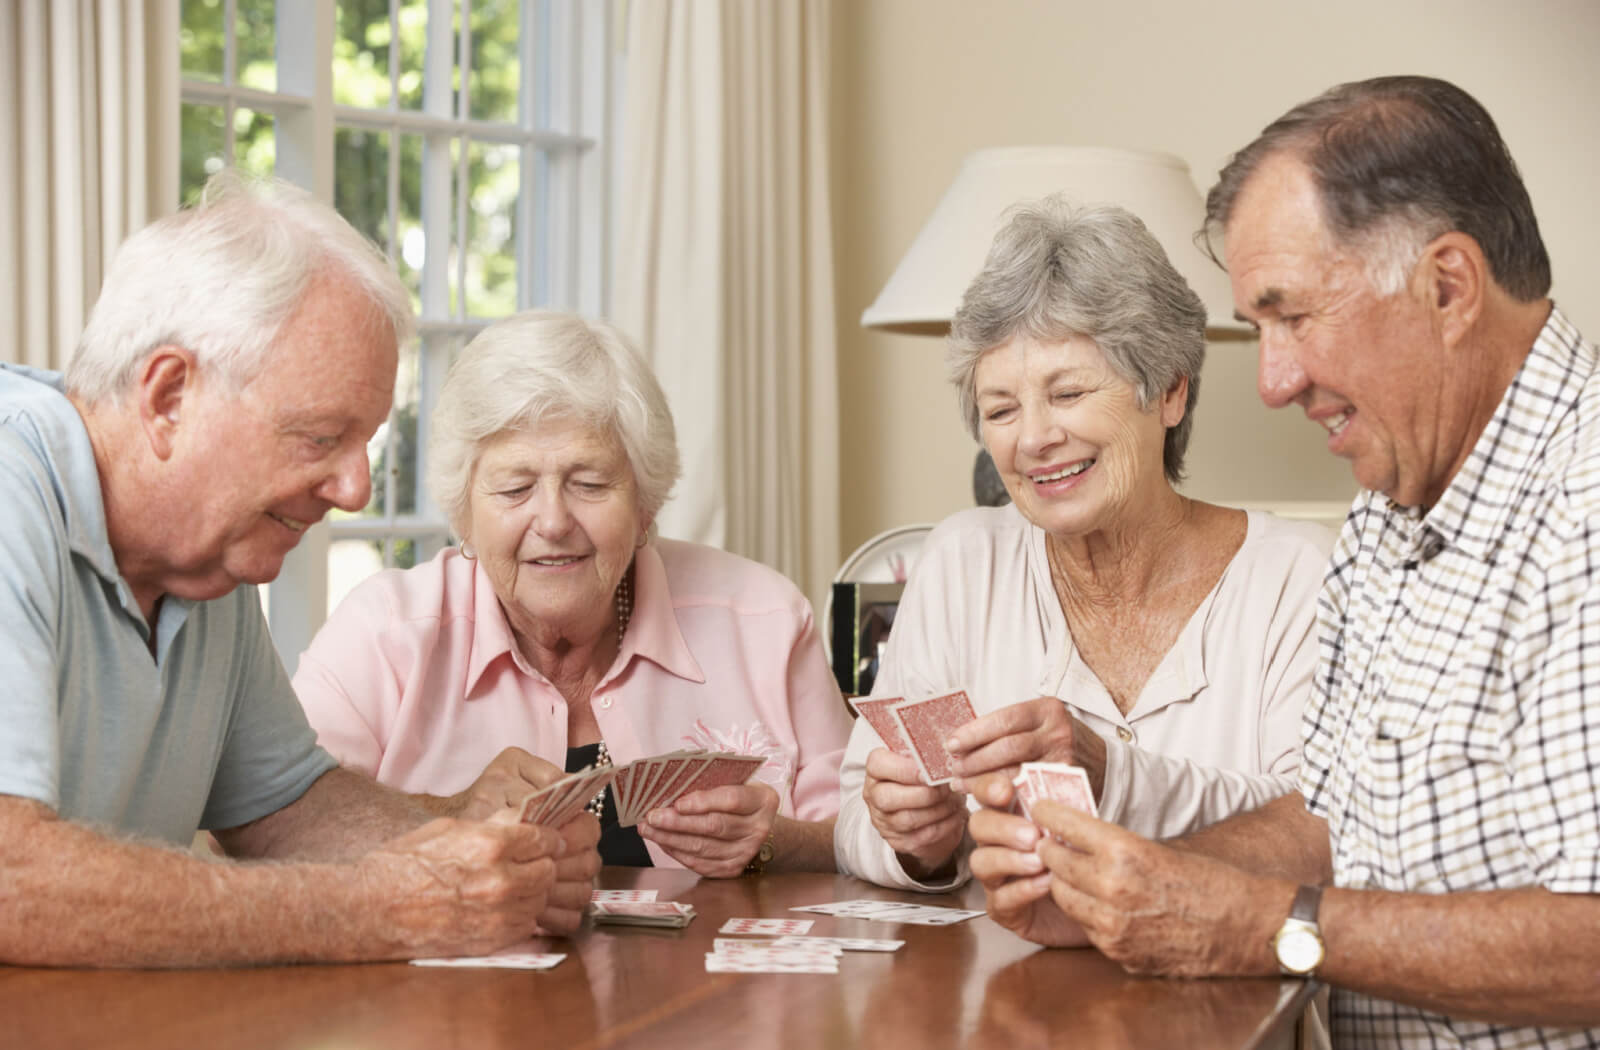 A group of 4 seniors are sitting at the table while enjoying playing cards.